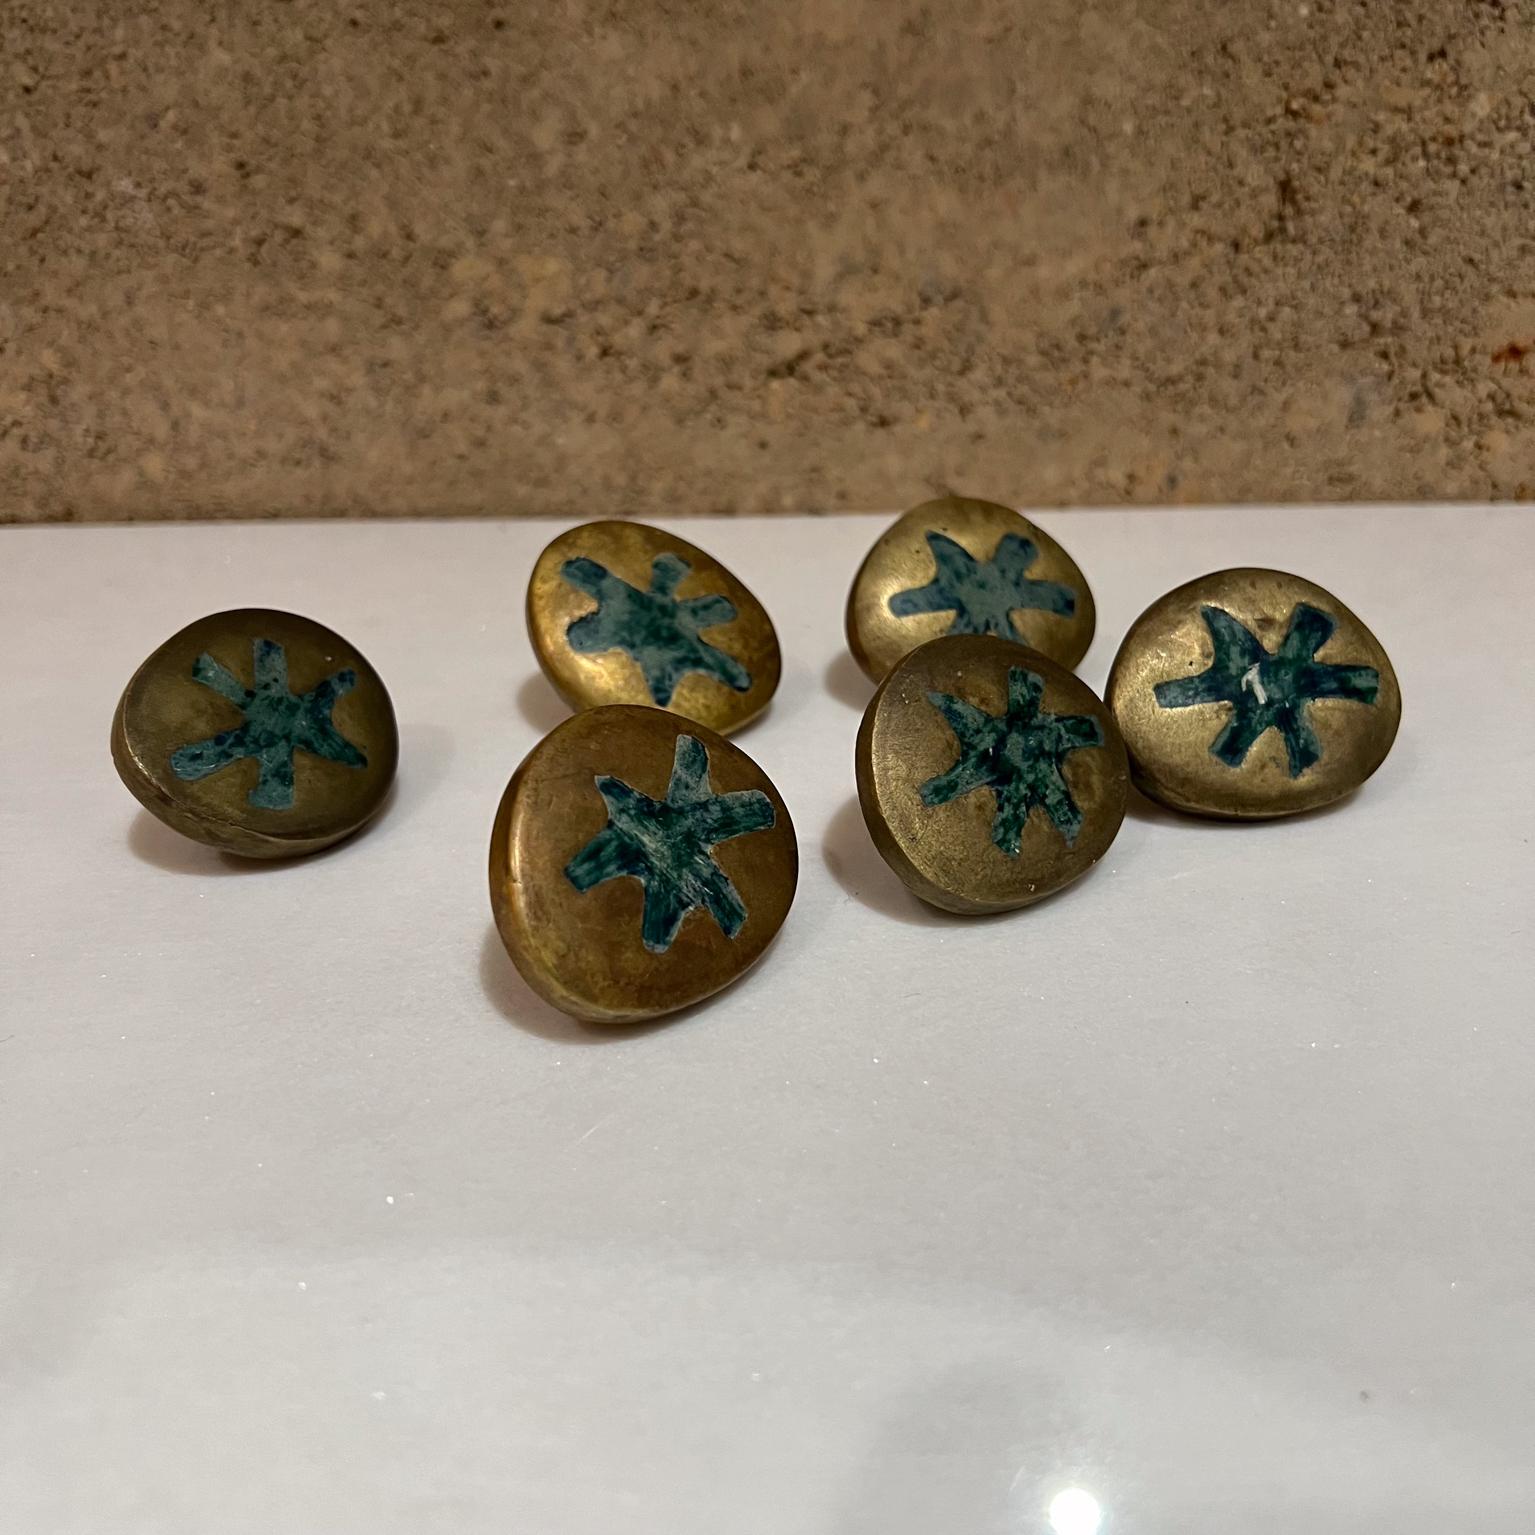 1950s Exquisite Set of 6 pulls knobs by famed artist Pepe Mendoza 
Made in Mexico.
Bronze Brass Malachite Stone Inlay Hardware
Maker stamped.
Preowned Original vintage condition
 .75 x 1.75 diameter
Refer to all images provided.